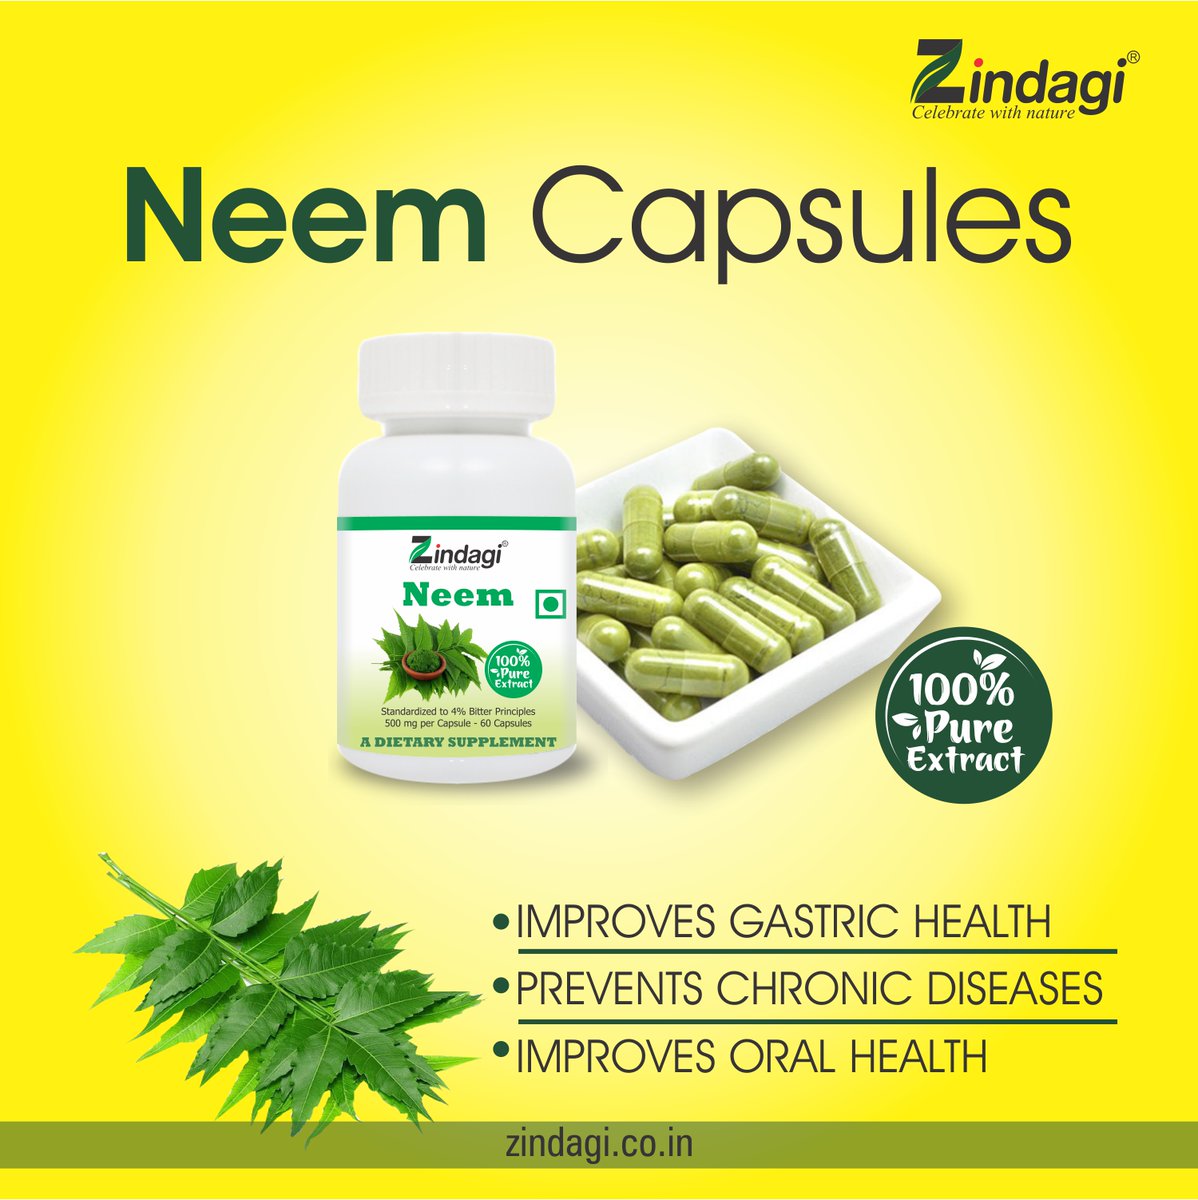 Fill your life with happiness and sweetness with #Zindagi #Stevia #NeemCapsule.
Get #Zindagi #Stevia #Neem Capsules #Improve gastric health # Prevents chronic disease #Improves oral health.
zindagi.co.in